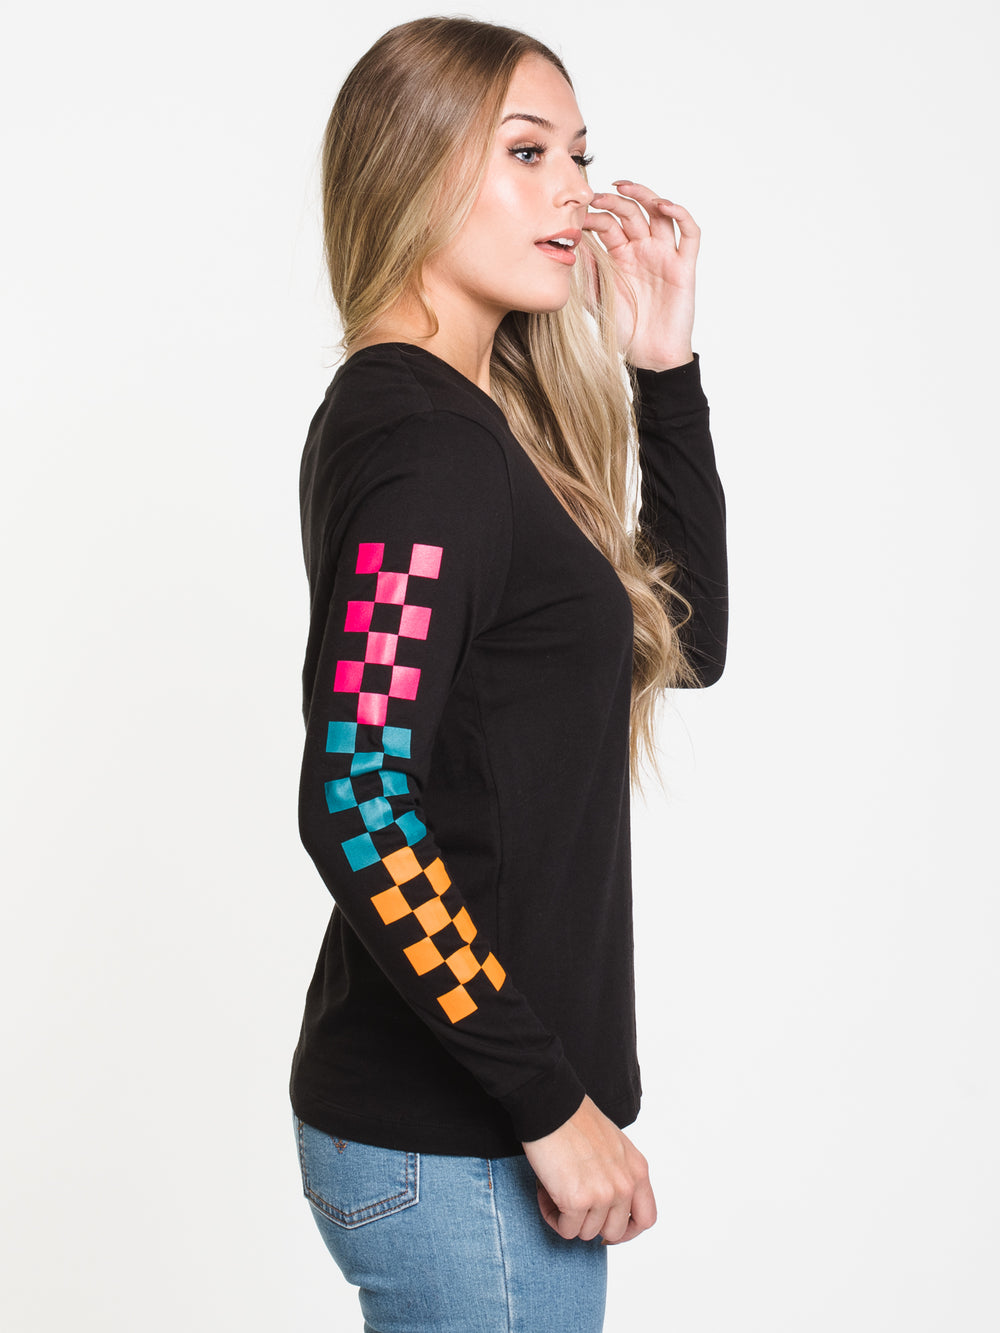 WOMENS WORD CHECK L/S TEE - BLACK - CLEARANCE